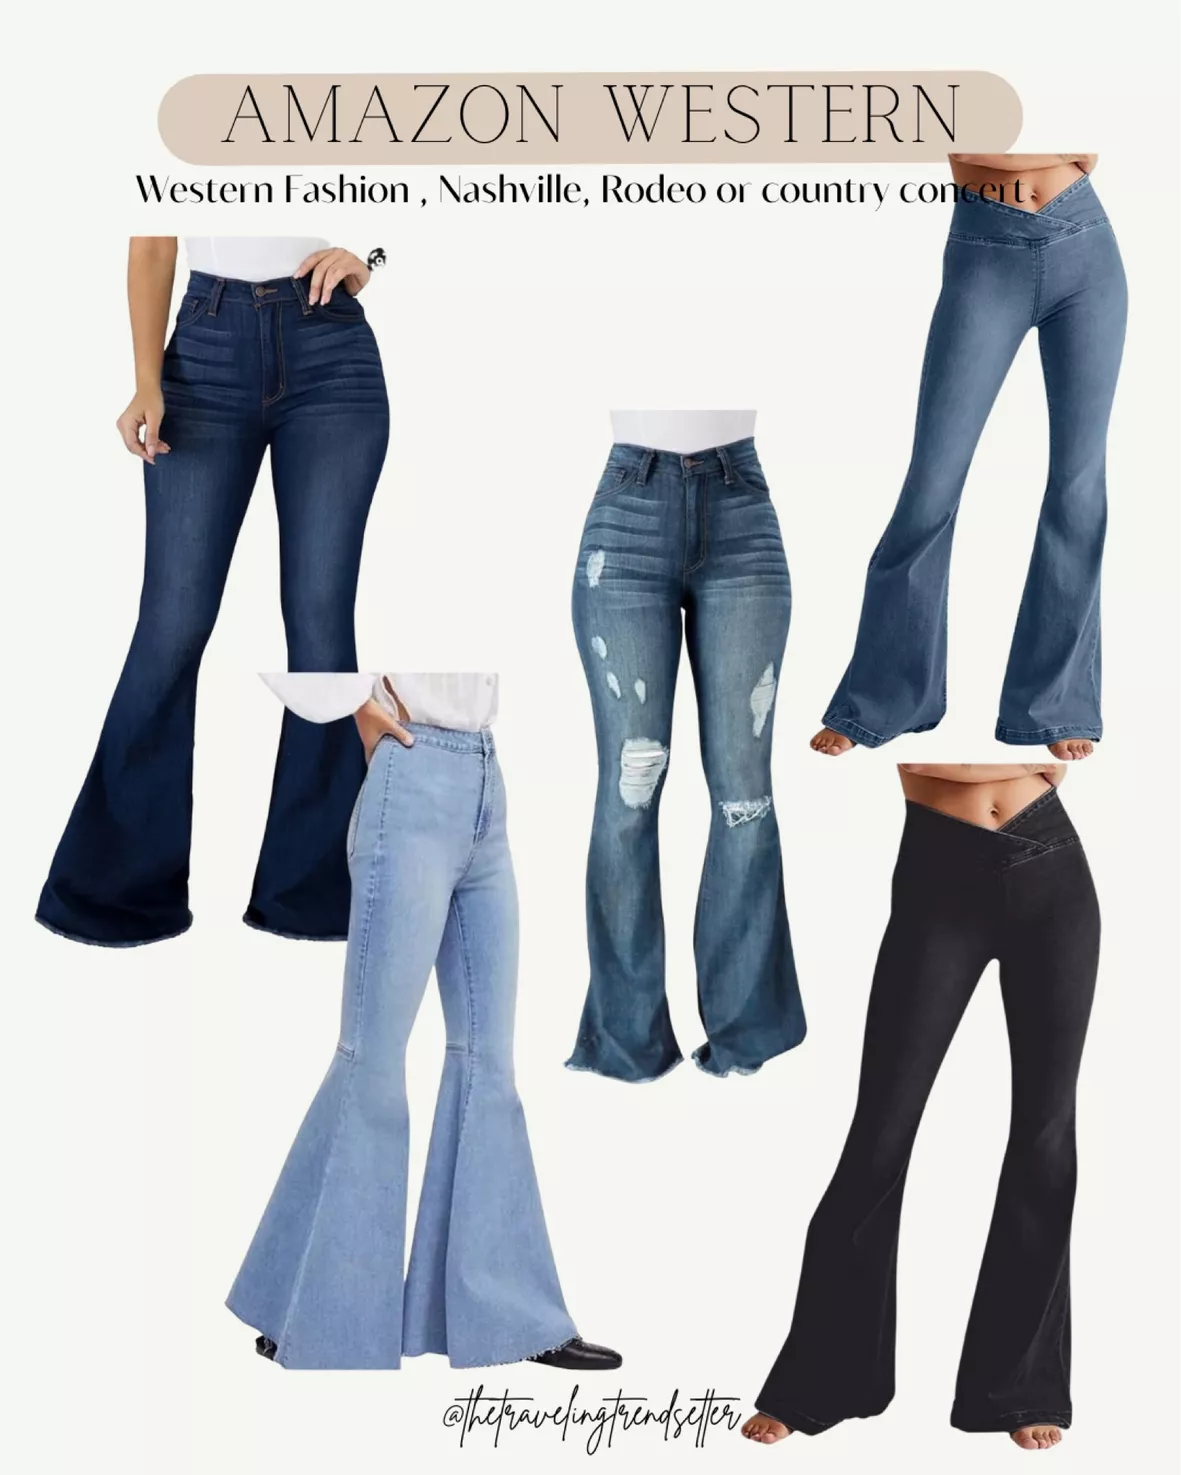 Bell Bottom Jeans for Women Ripped High Waisted Classic Flared Denim Pants